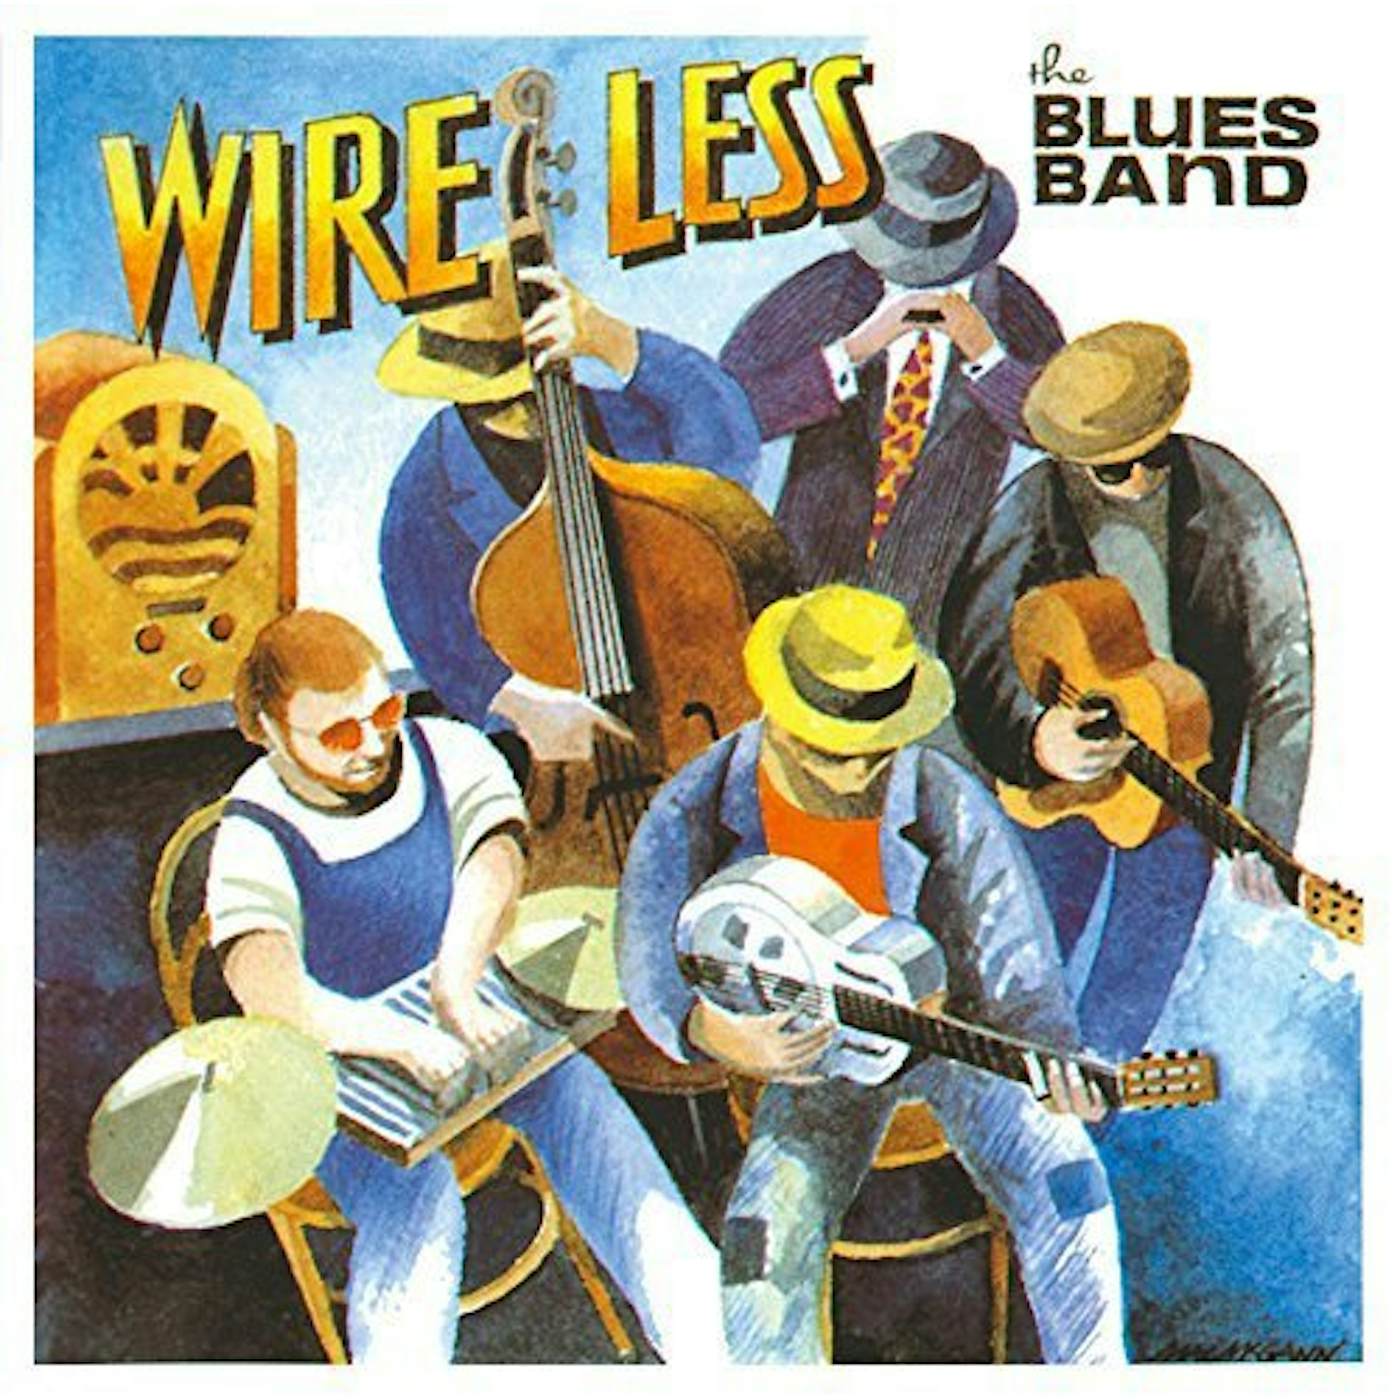 The Blues Band WIRE LESS CD